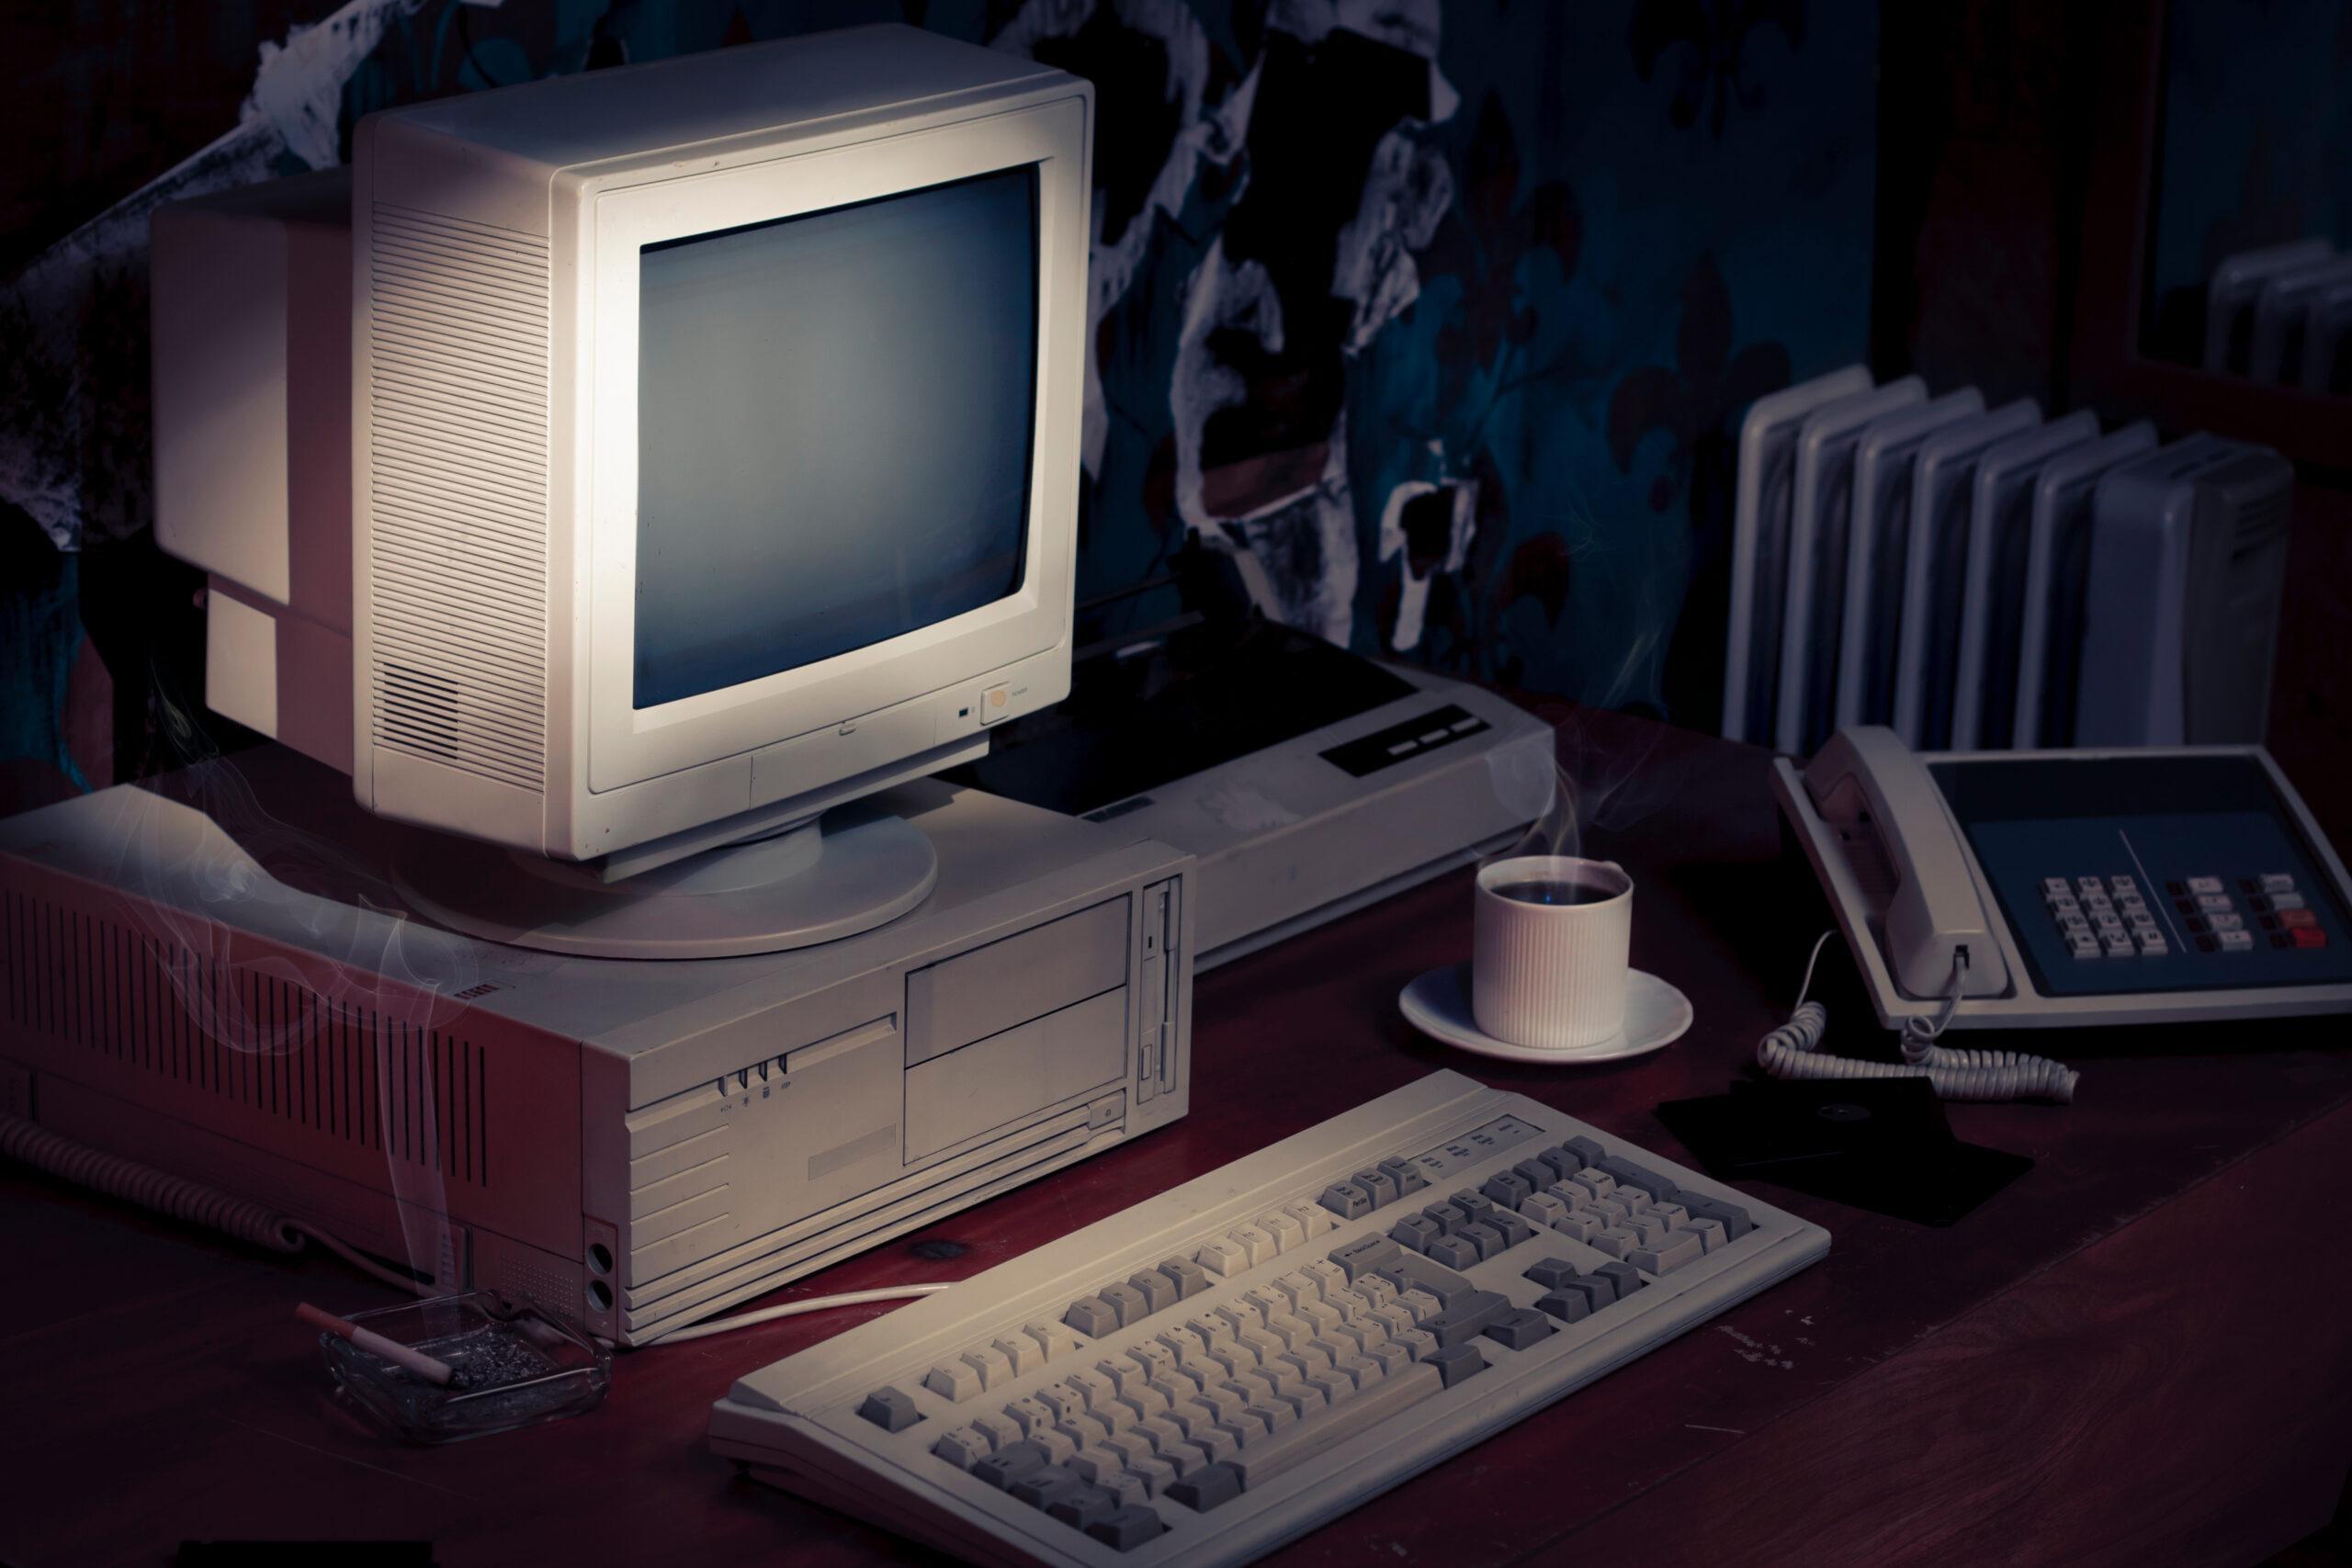 dramatic lighting image of an old, vintage workspace